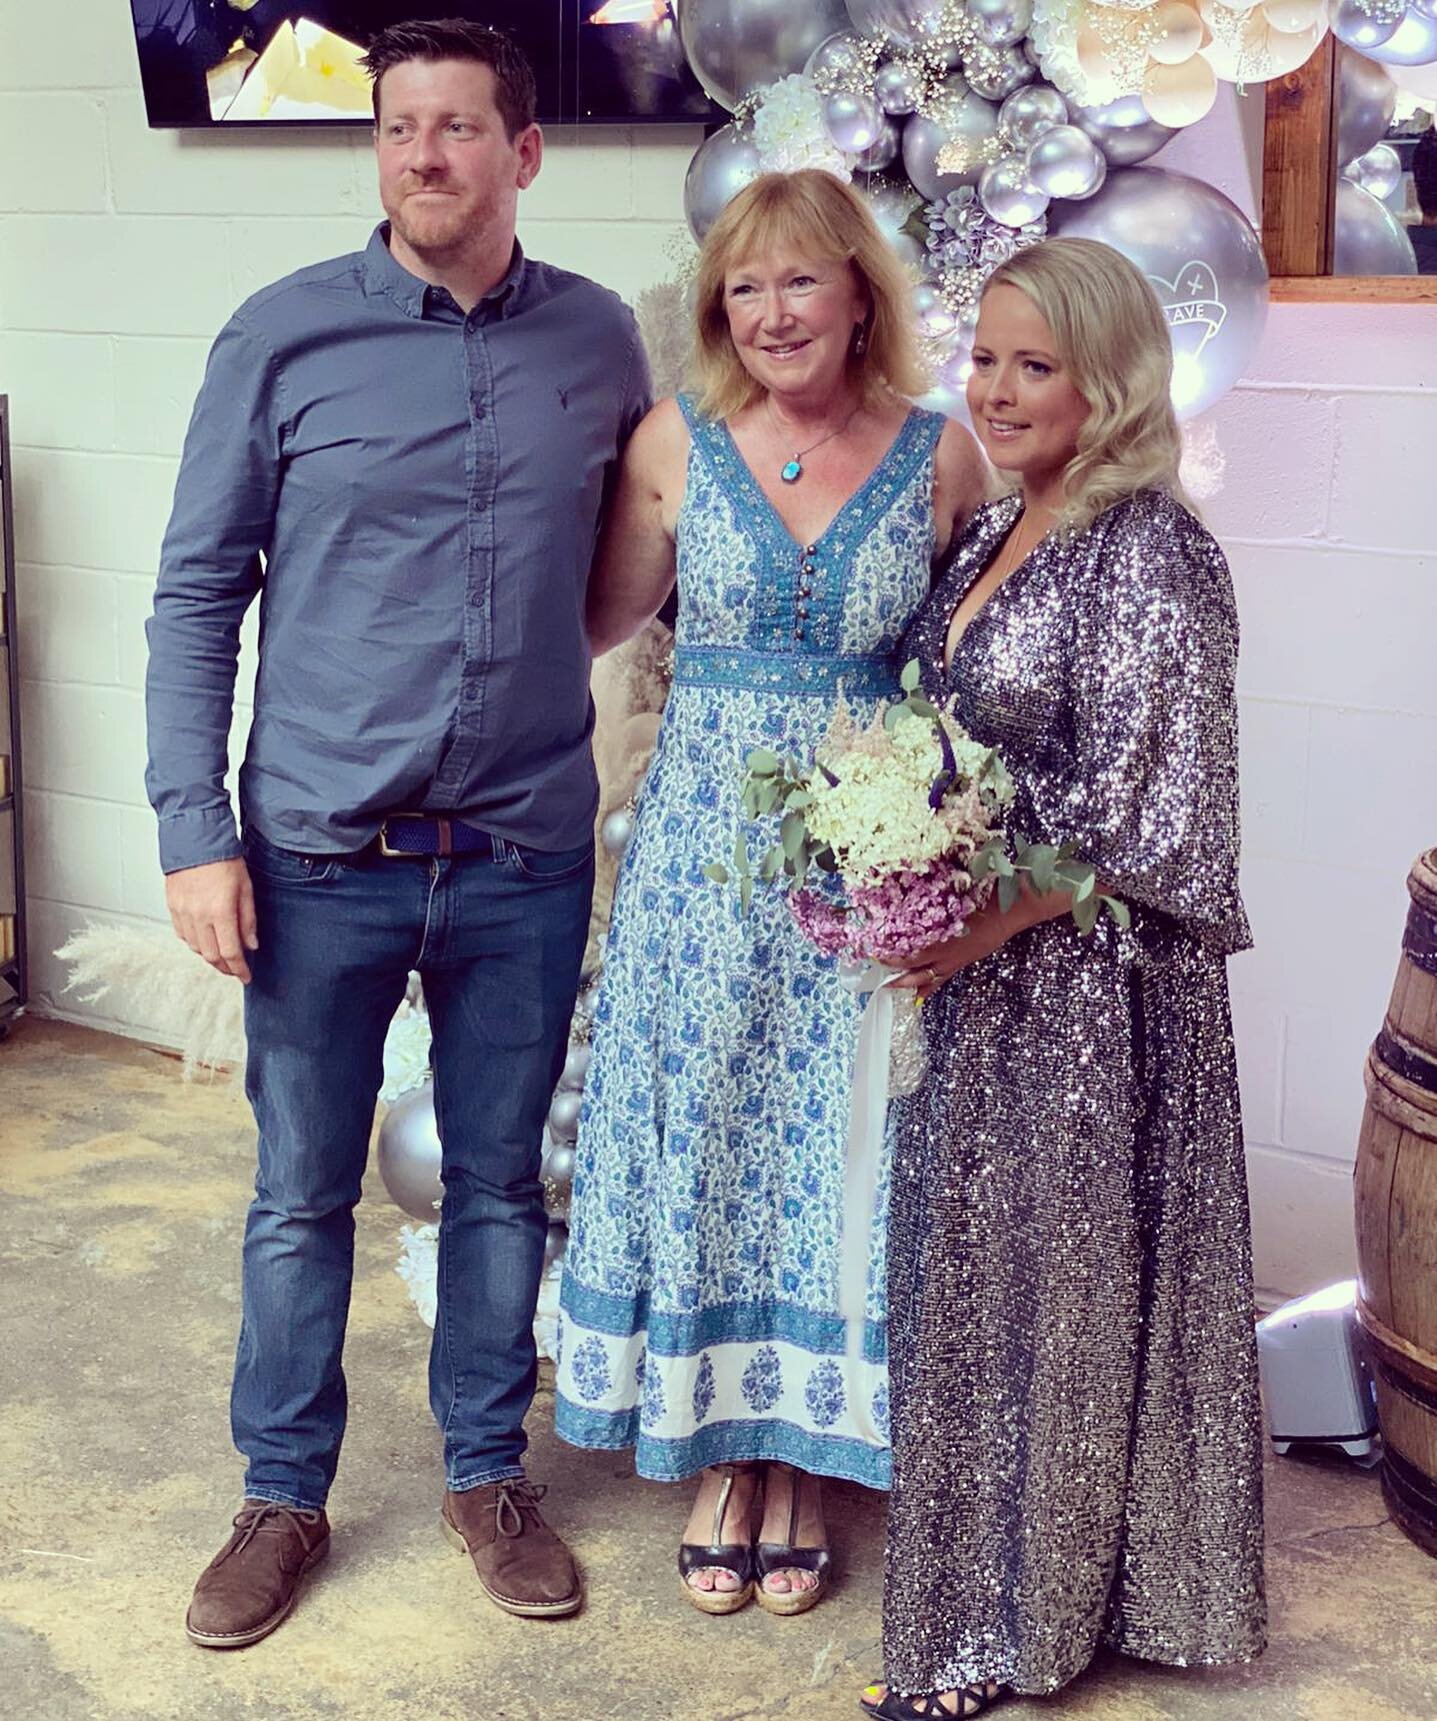 Part of my role as a Celebrant can be to renew wedding vows, a special way to mark a particular anniversary or just reaffirm a couples commitment and love for one another 🌿 This was the vow renewal of Tom &amp; Kerrie @old_auction_house last summer.